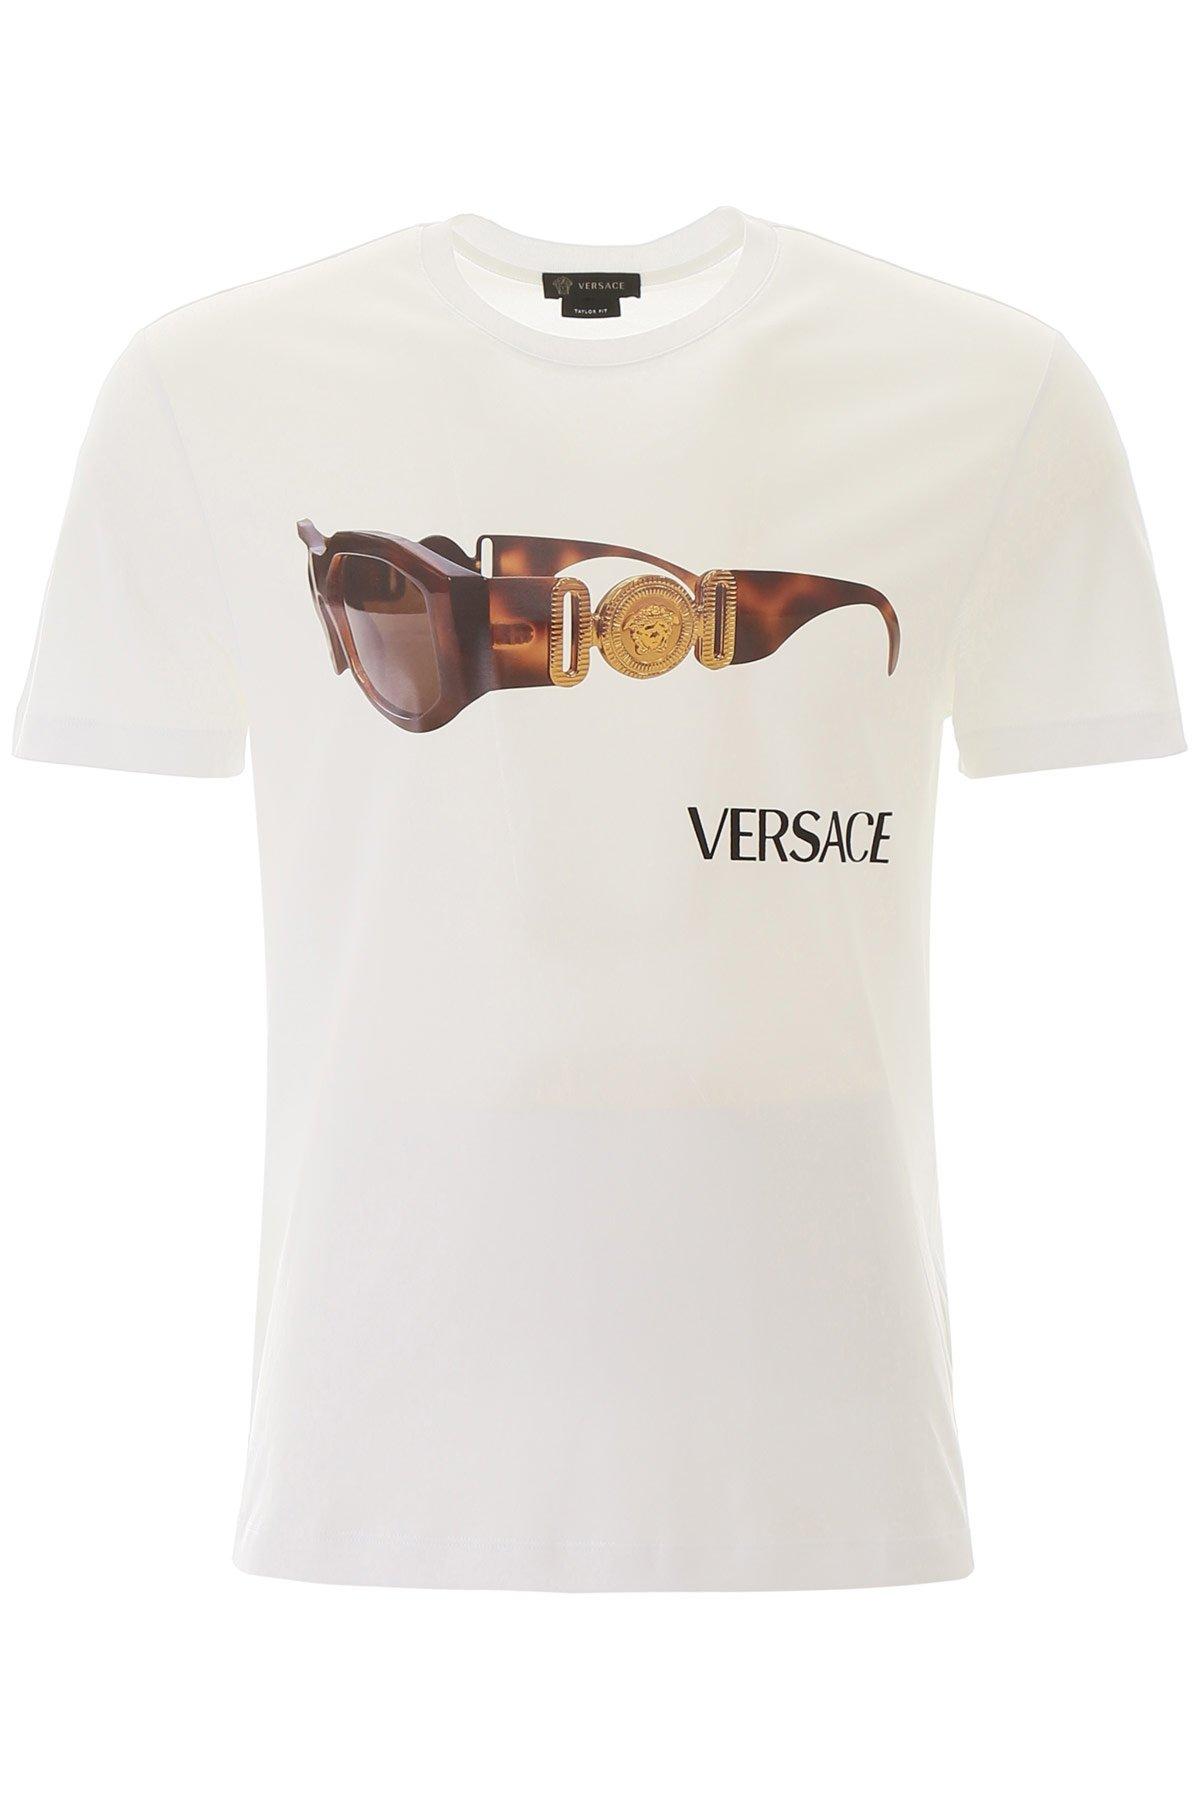 Versace Biggie Print T-shirt in White for Men - Save 37% - Lyst